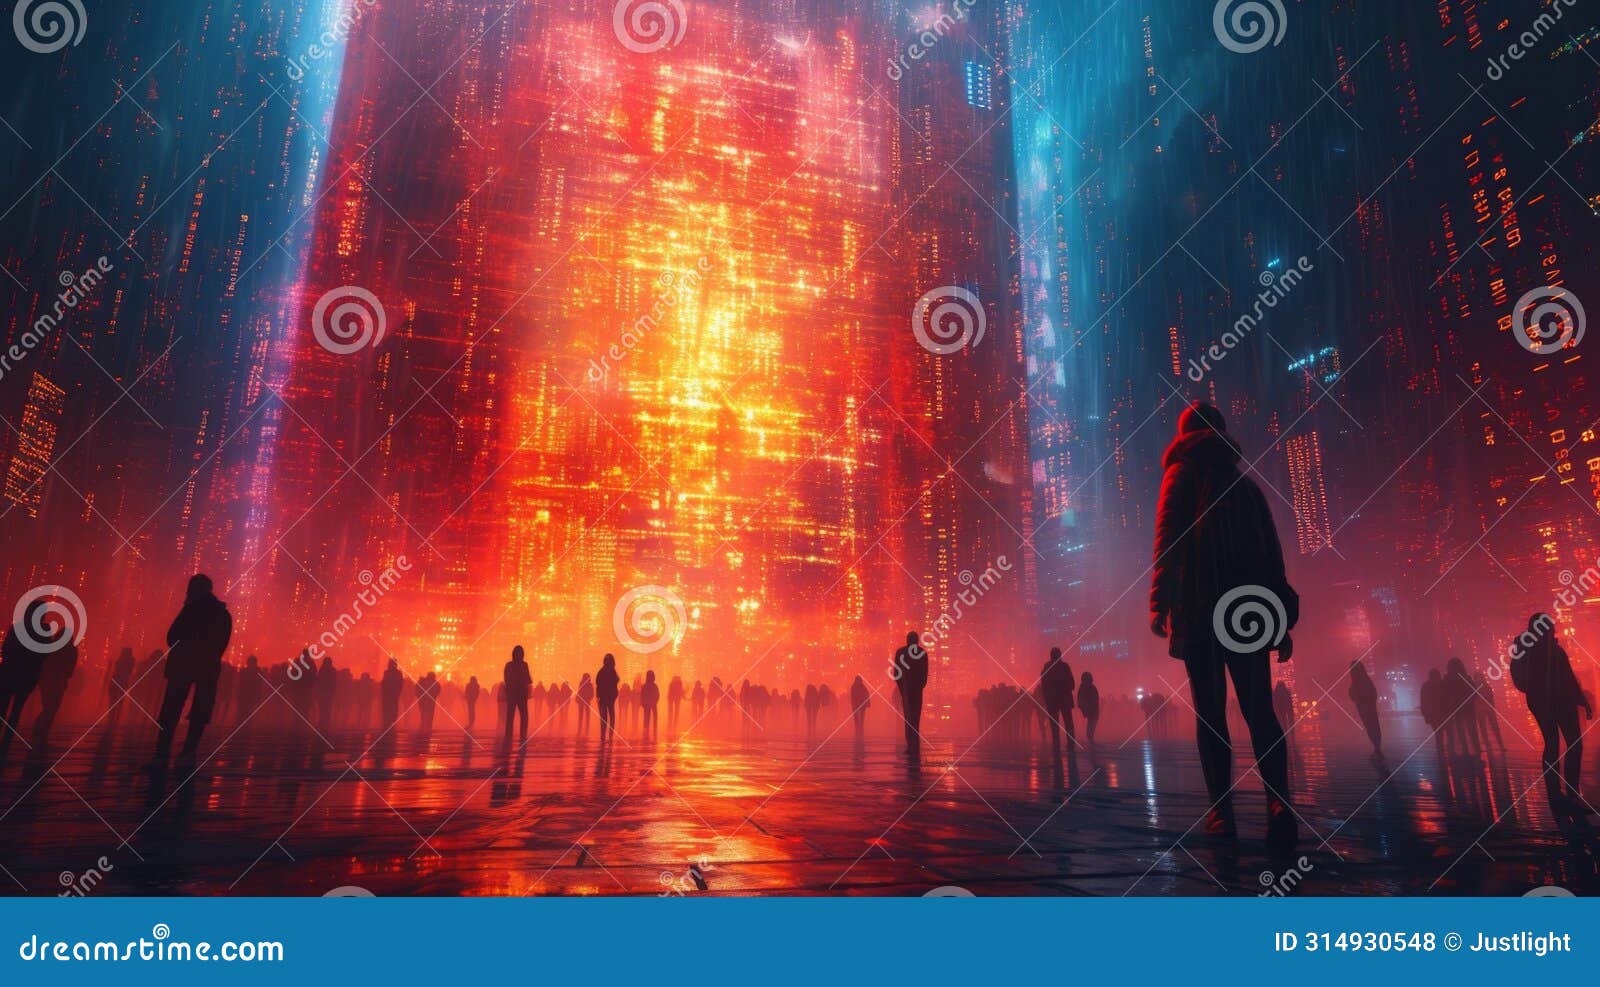 a large futuristic cityscape takes up most of the image with people going about their daily business. however instead of